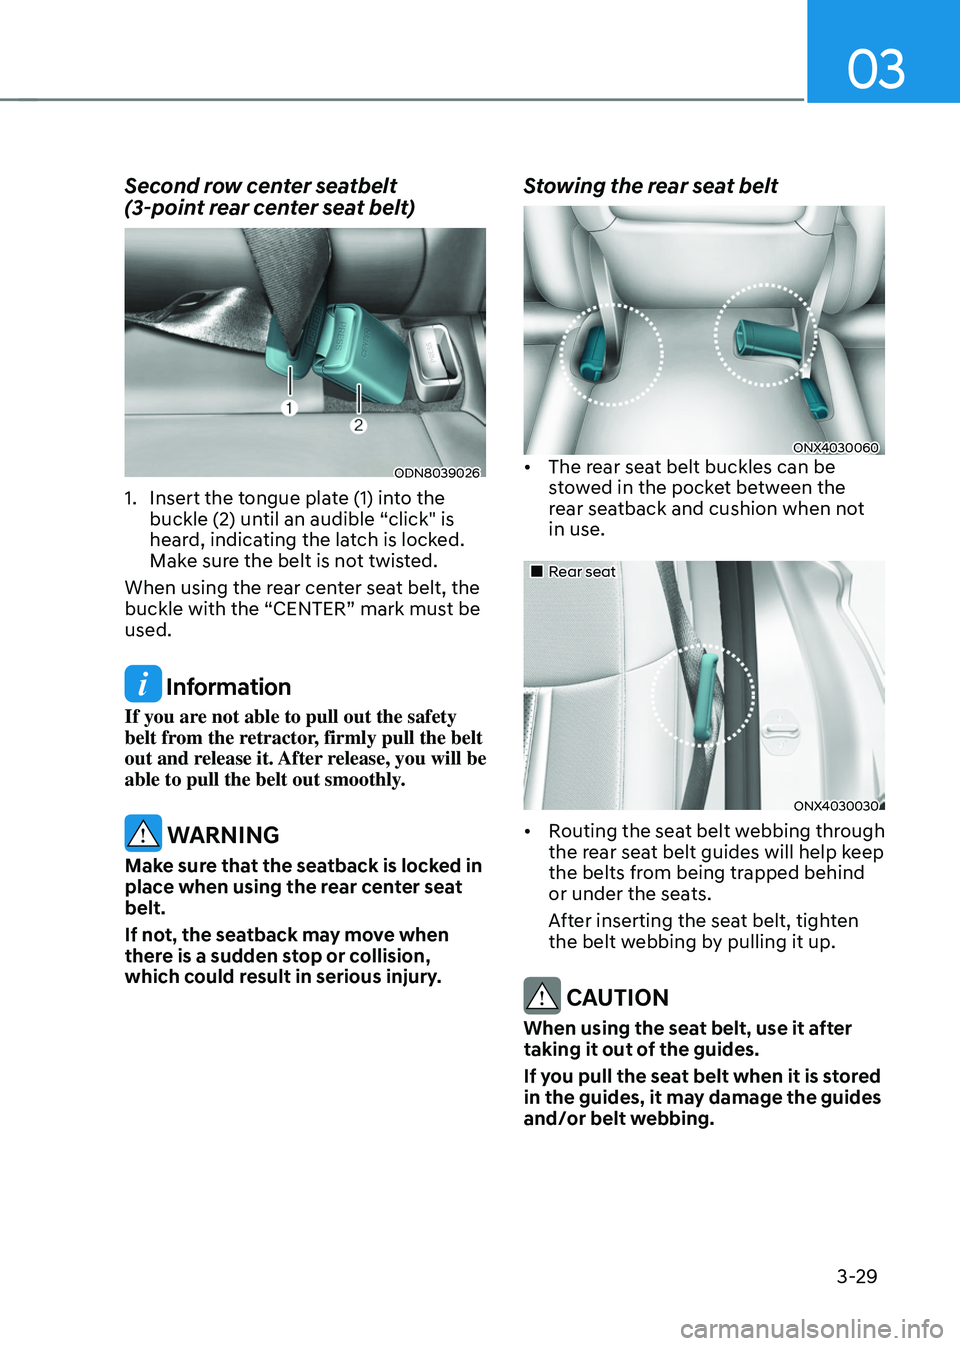 HYUNDAI TUCSON 2022 Workshop Manual 03
3-29
Second row center seatbelt  
(3-point rear center seat belt)
ODN8039026
1. Insert the tongue plate (1) into the 
buckle (2) until an audible “click" is 
heard, indicating the latch is lo